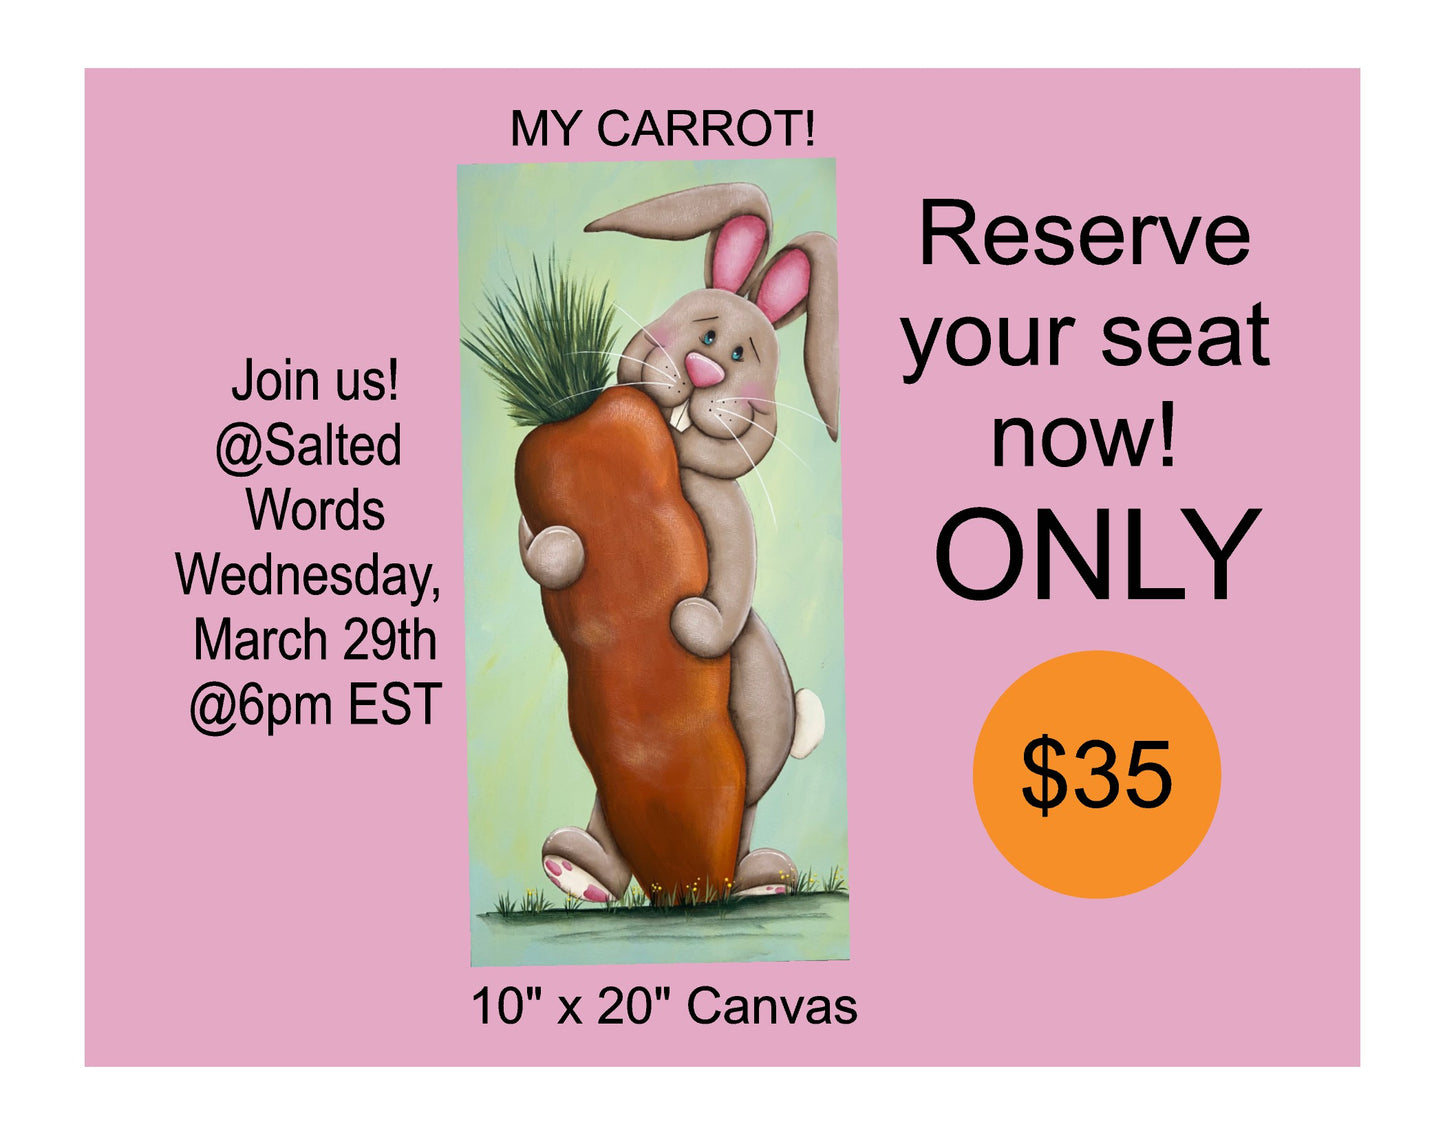 March 29 - Wednesday Paint Class - My Carrot! @ Salted Words